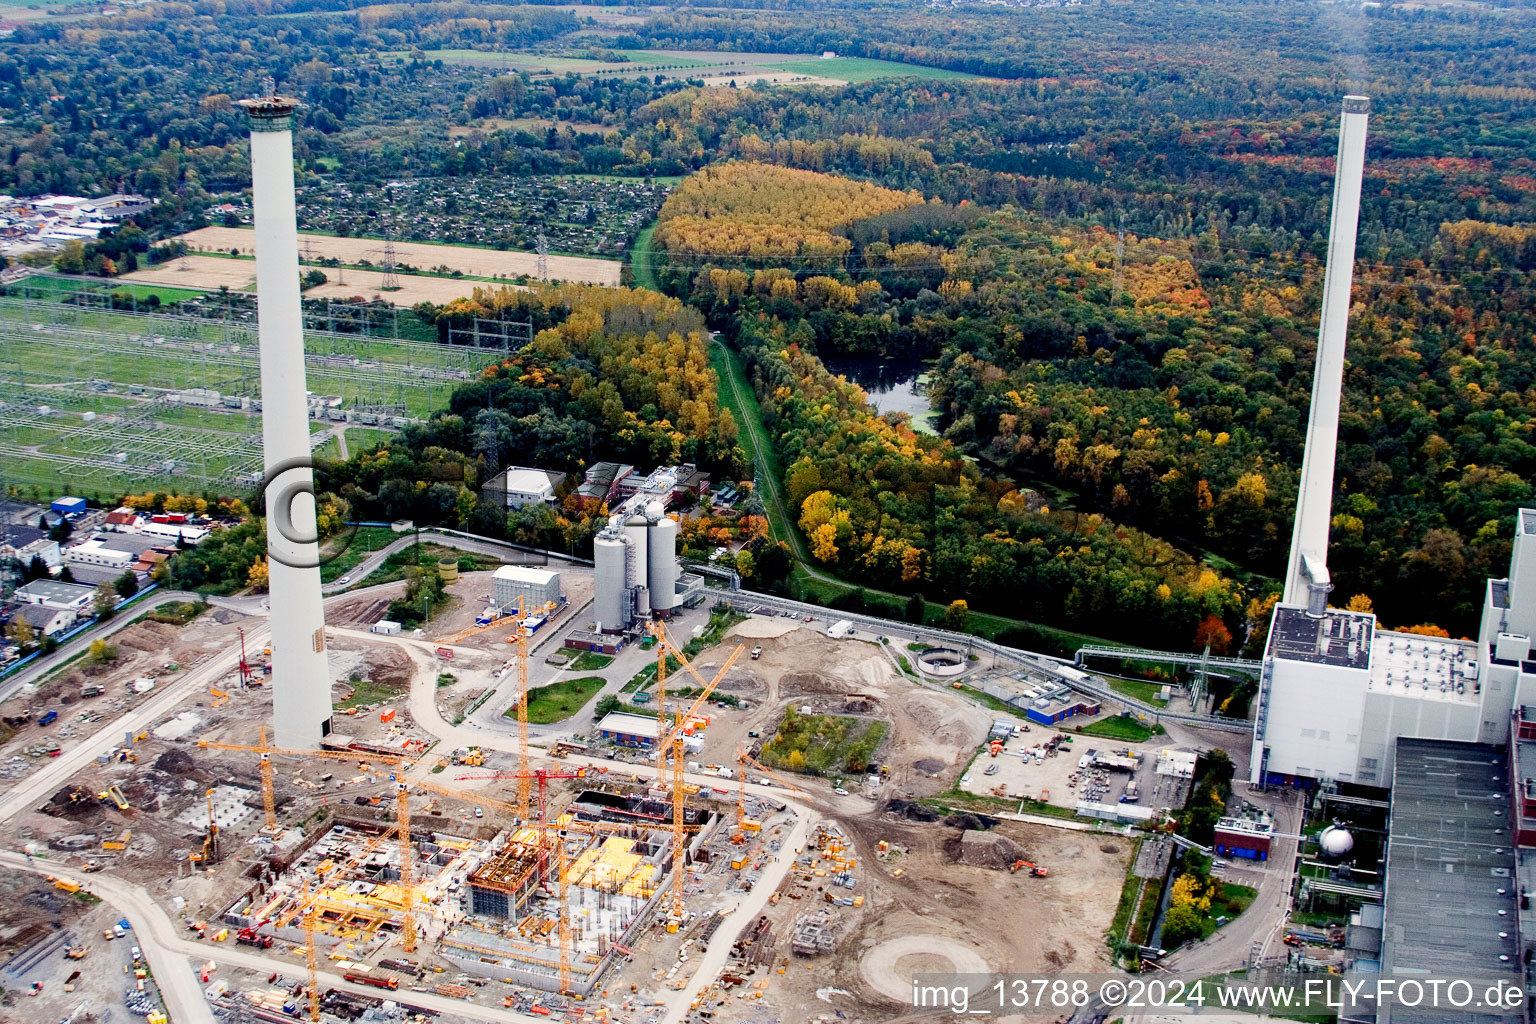 EnBW builds new coal-fired power plant on Rheinhafen in the district Rheinhafen in Karlsruhe in the state Baden-Wuerttemberg, Germany seen from above